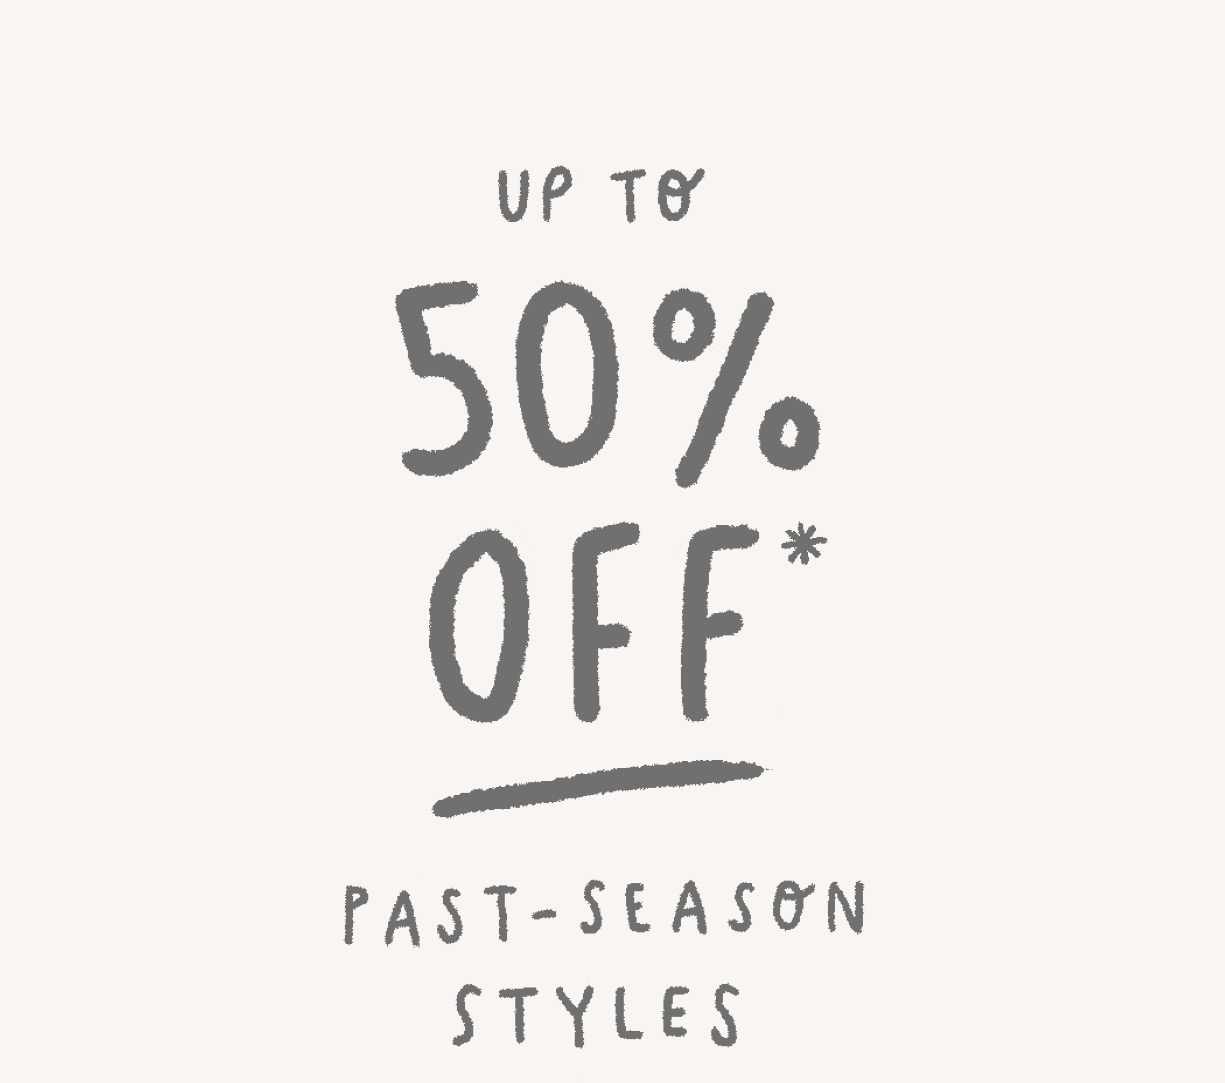 Up to 50% off past season styles! SHOP NOW UP 7 50% OFF PAST-SEASON STYLES 